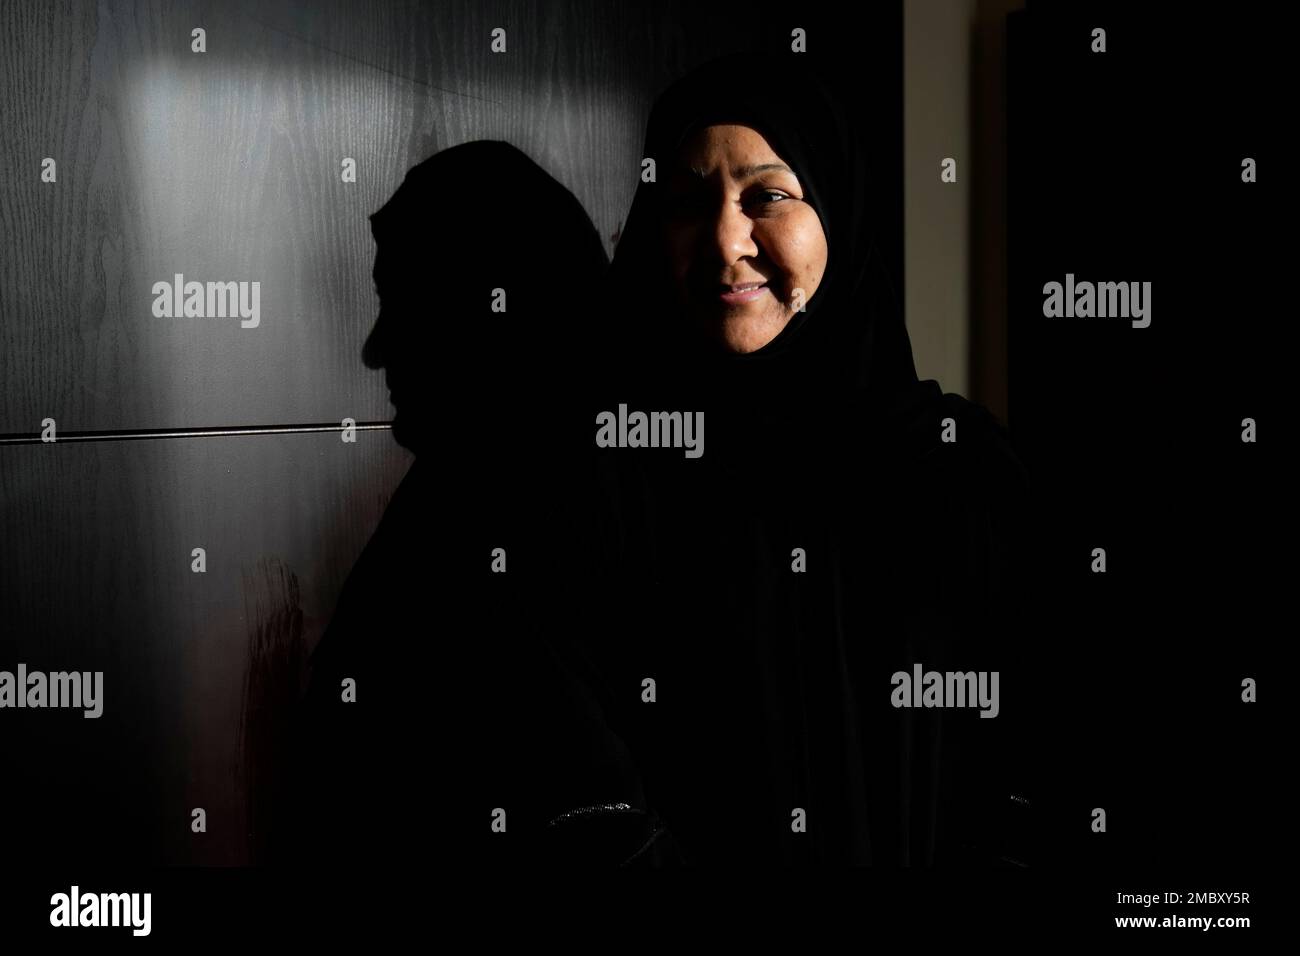 Bahraini former political prisoner Najah Yusuf poses for a photograph  during an interview with The Associated Press in Manama, Bahrain, Thursday,  March 17, 2022. As Formula One begins the new season in